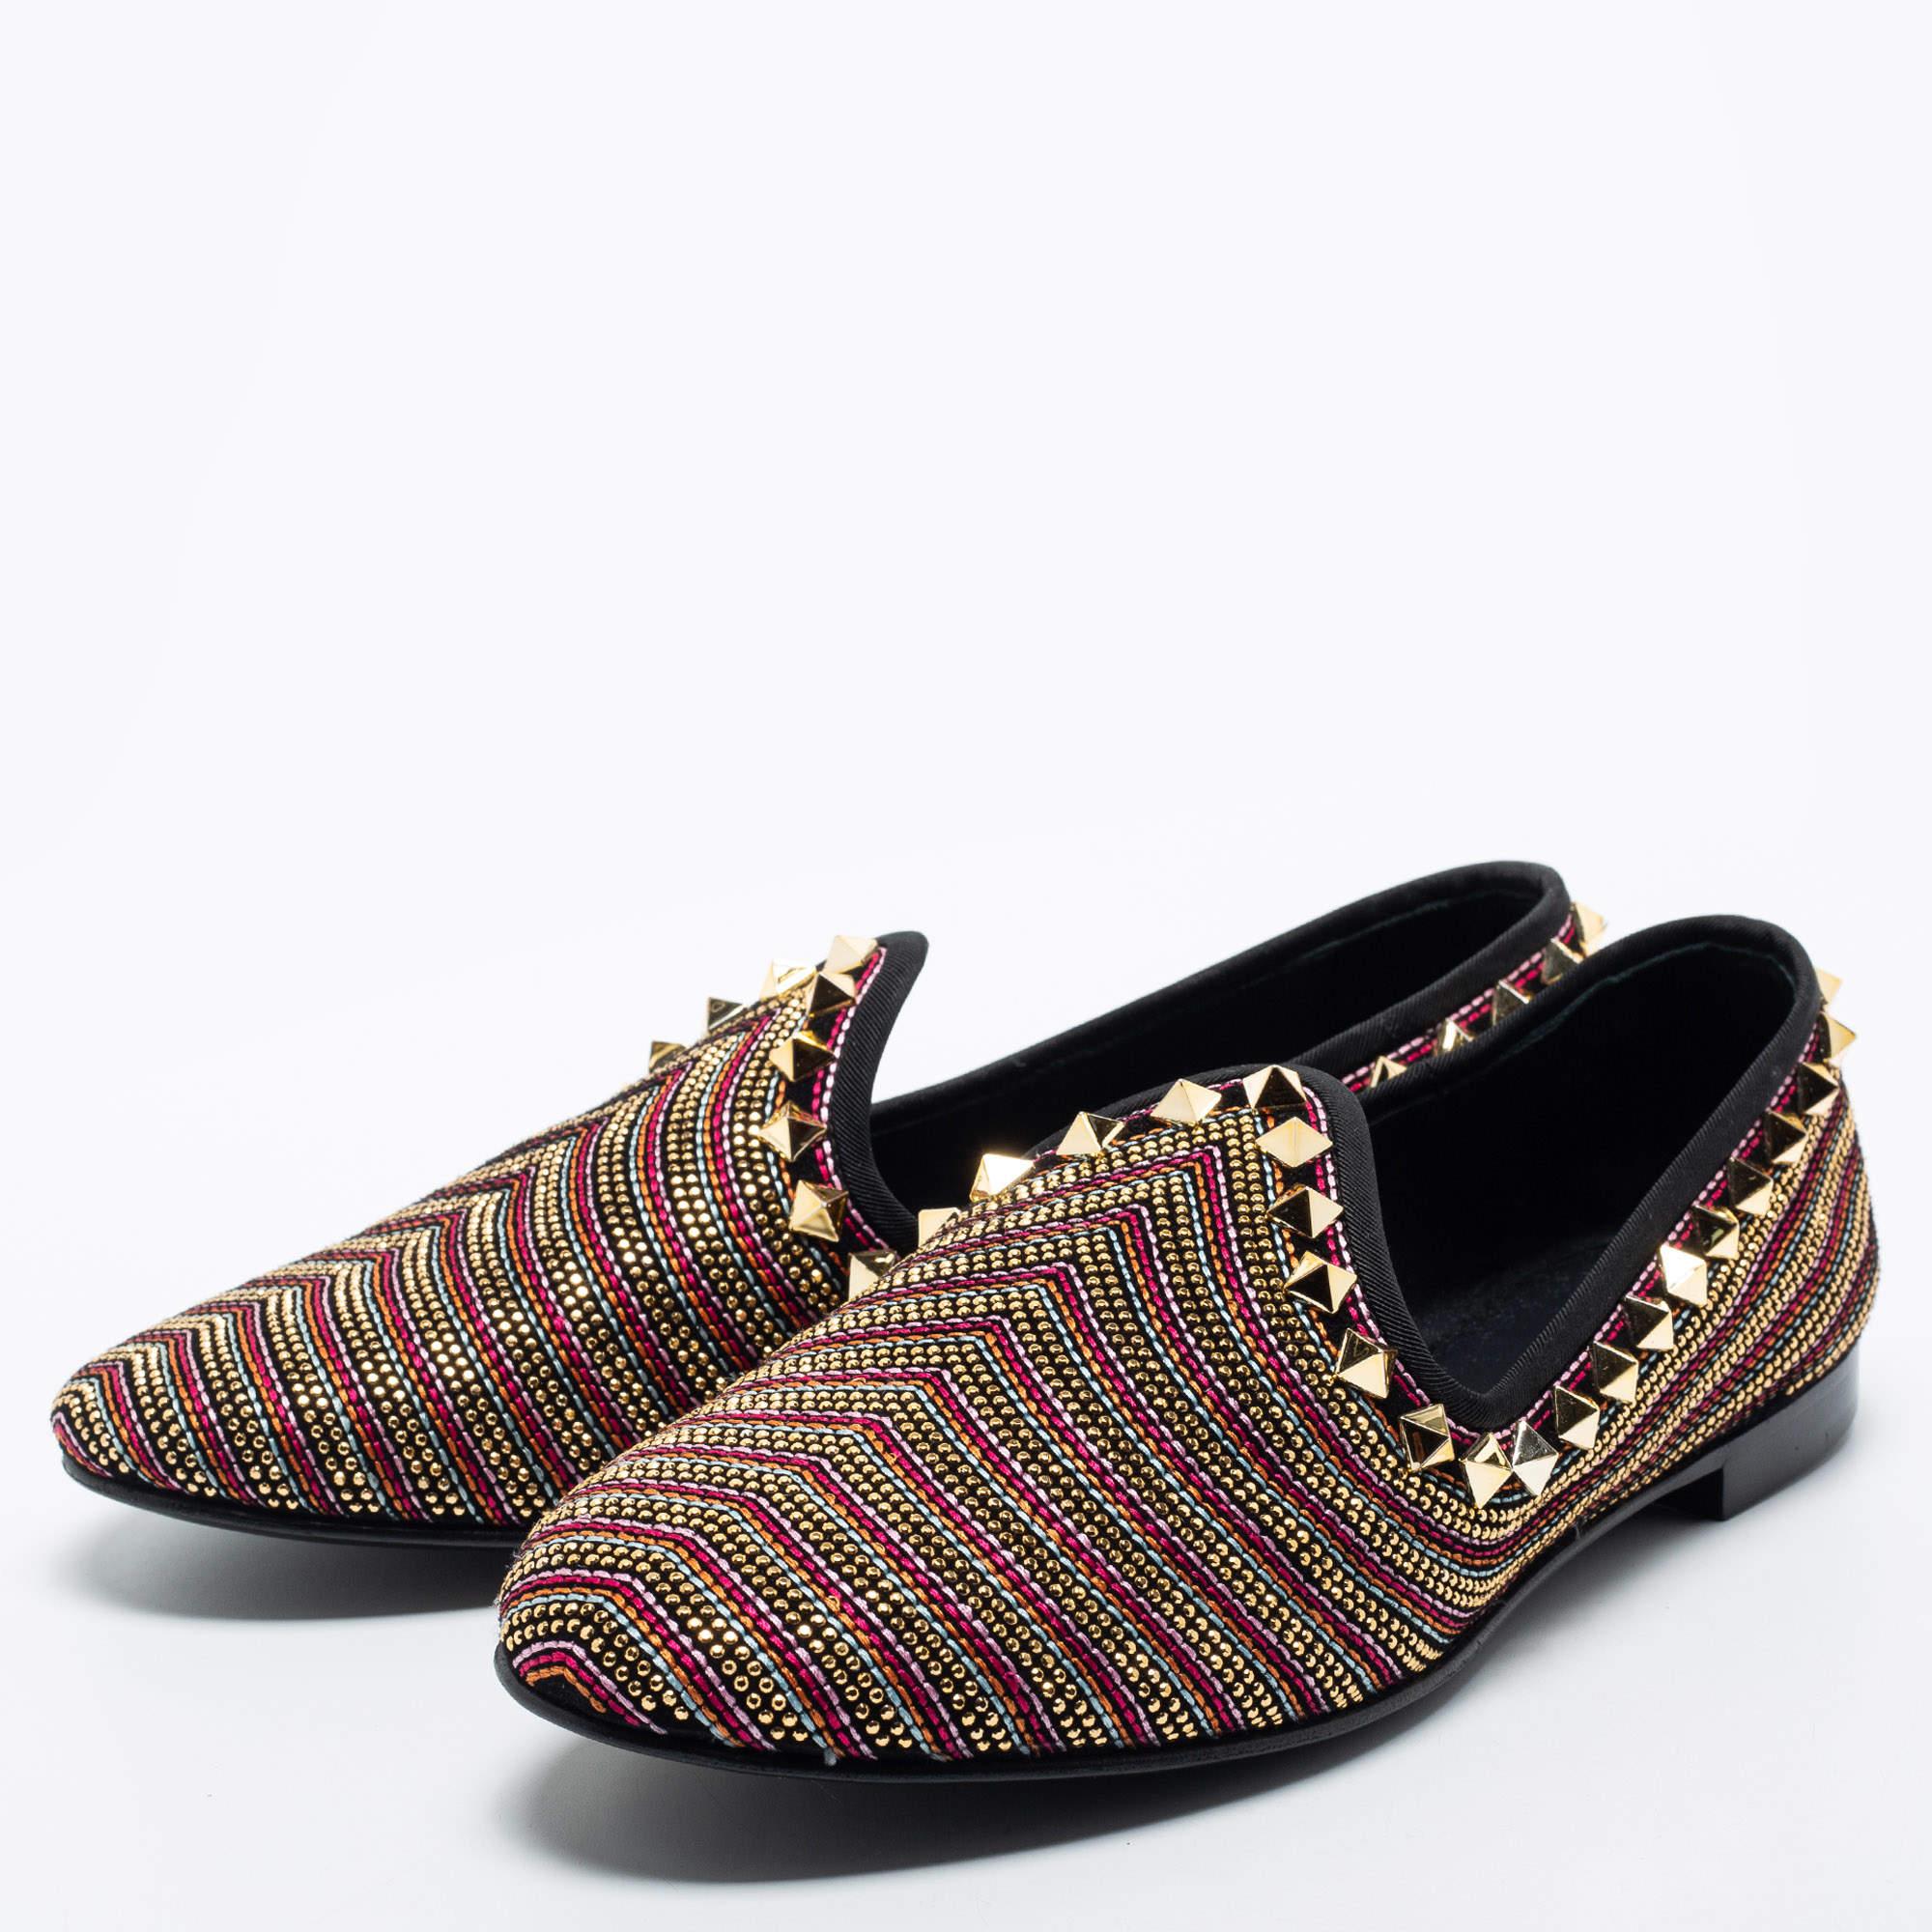 Giuseppe Zanotti Multicolor Embellished Suede Smoking Slippers Size 41 In Excellent Condition For Sale In Dubai, Al Qouz 2